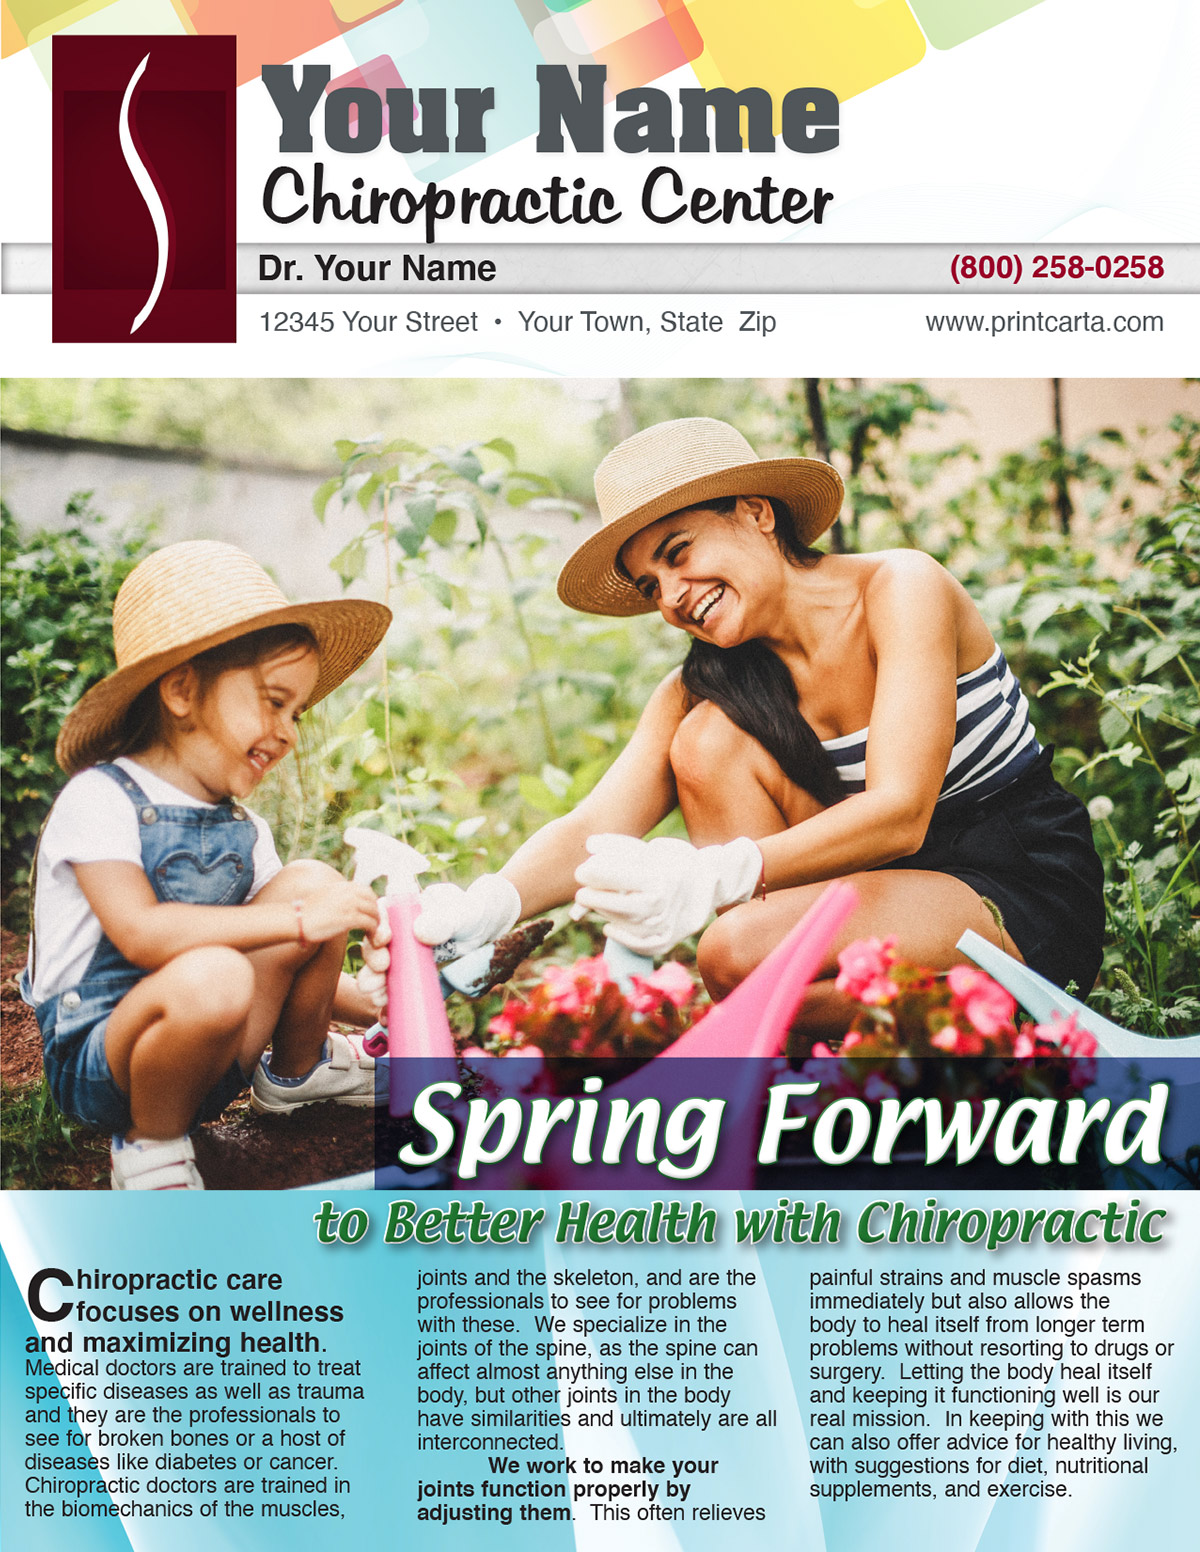 Spring Forward to Better Health